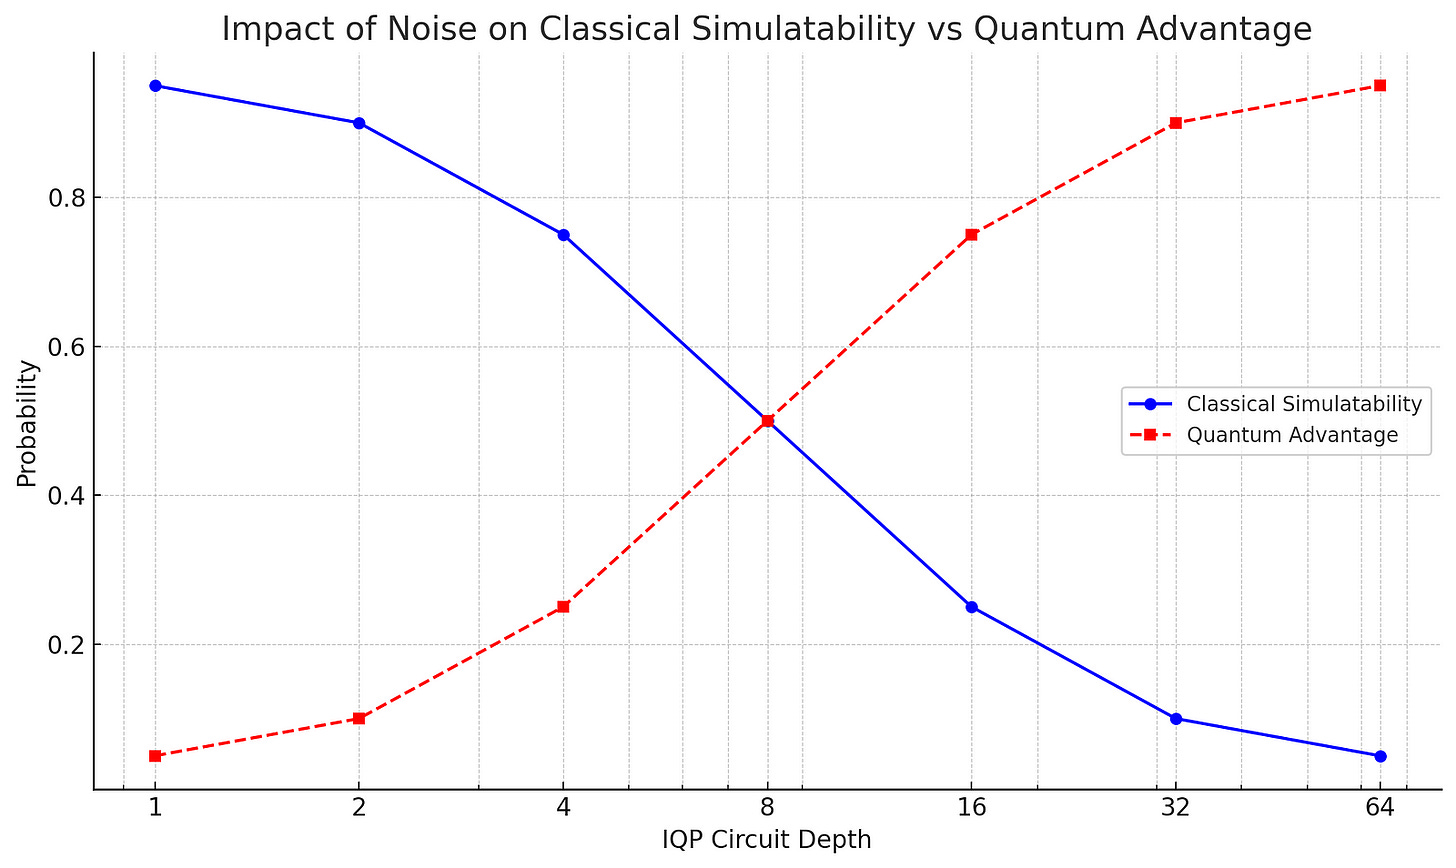 A graph showing two lines, one representing the probability of classical simulatability and the other representing quantum advantage, as the depth of IQP circuits increases. The classical simulatability decreases with circuit depth, while quantum advantage increases, highlighting the point where classical algorithms can effectively simulate noisy quantum circuits.